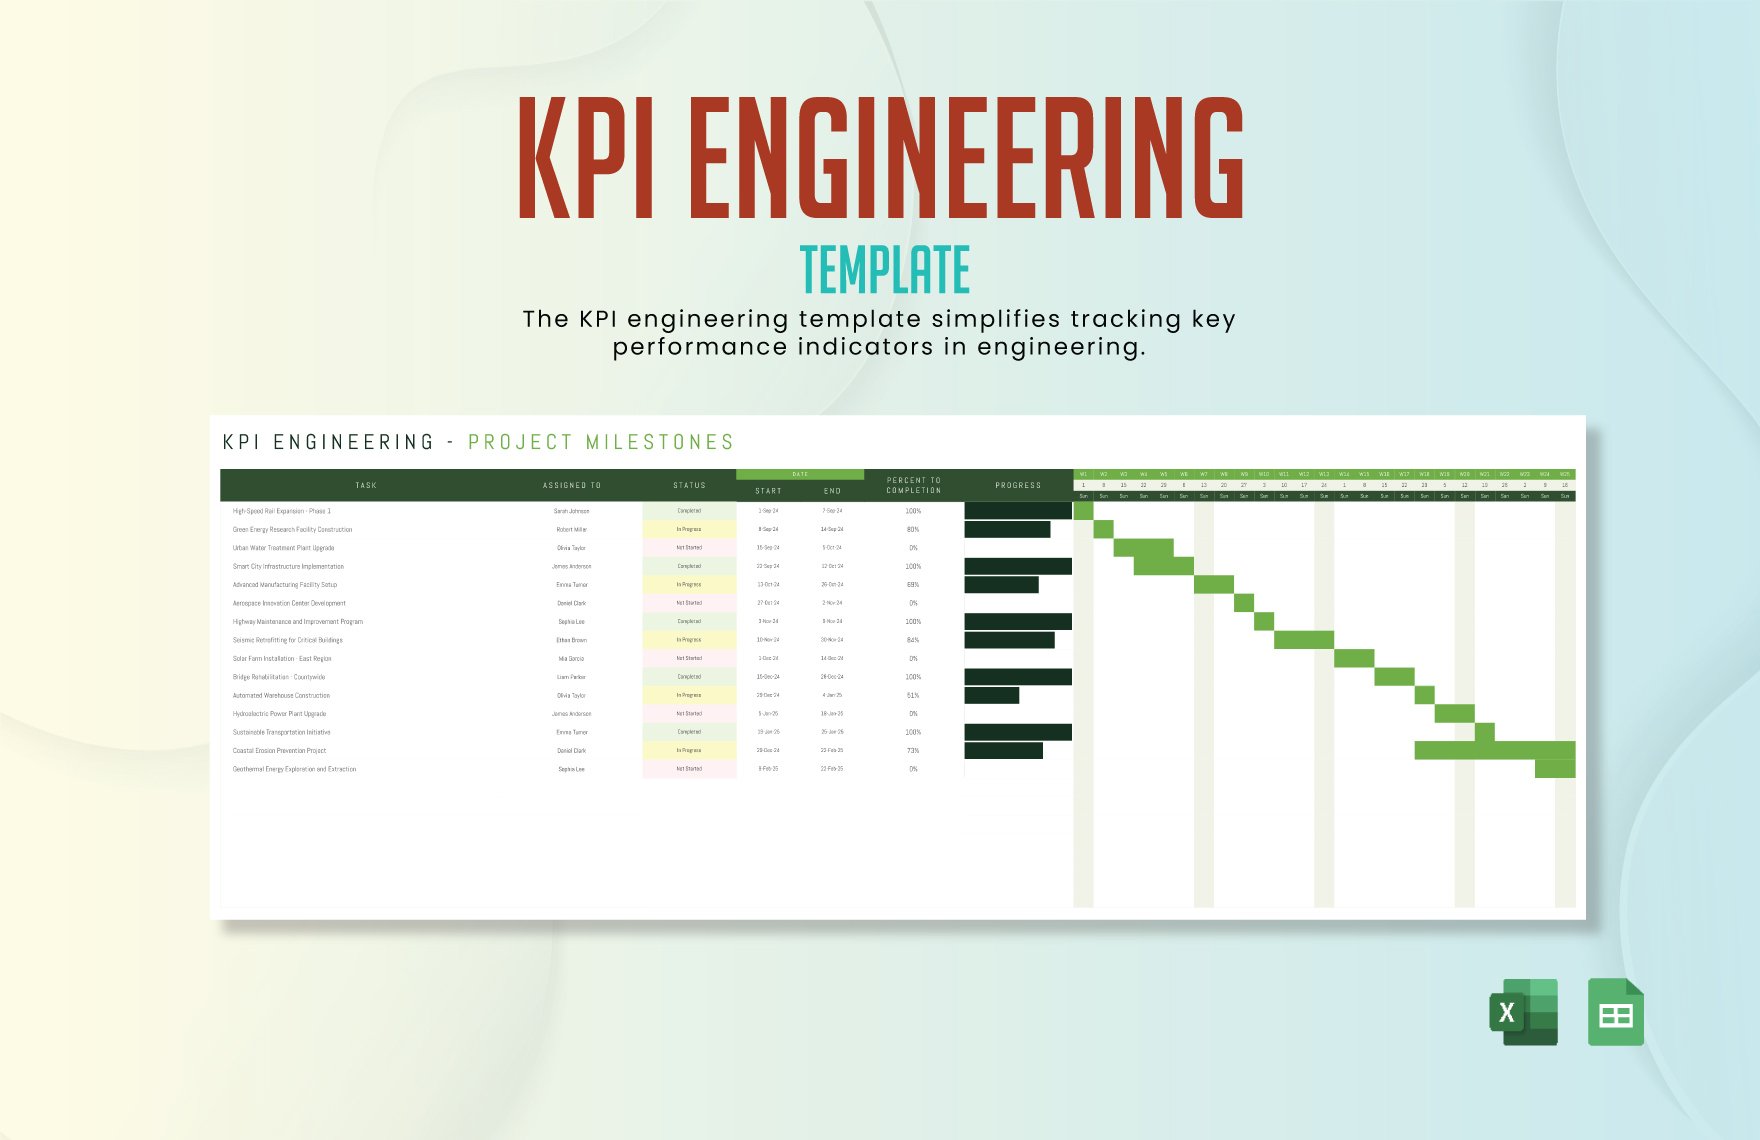 KPI Engineering Template in Excel, Google Sheets